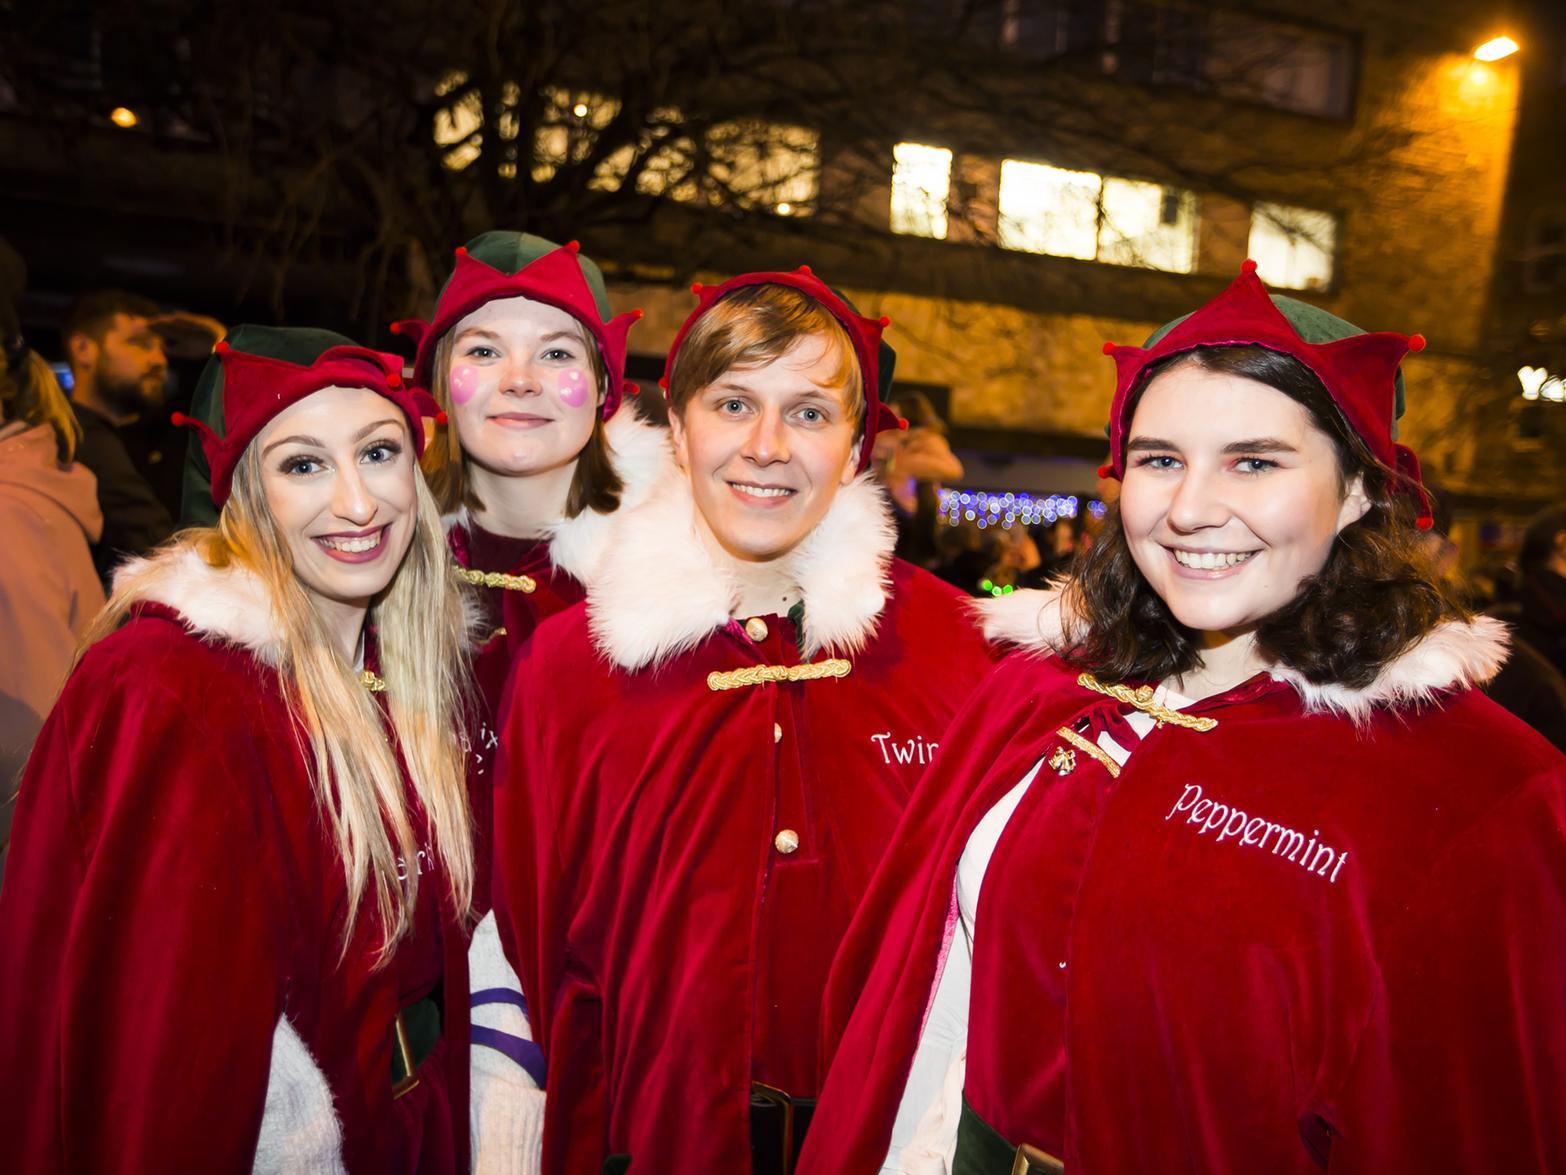 Halifax Christmas lights switch-on. From the left, Abigayle Rogers, Ellie Spooner, Jack Noble and Anna Crowther.